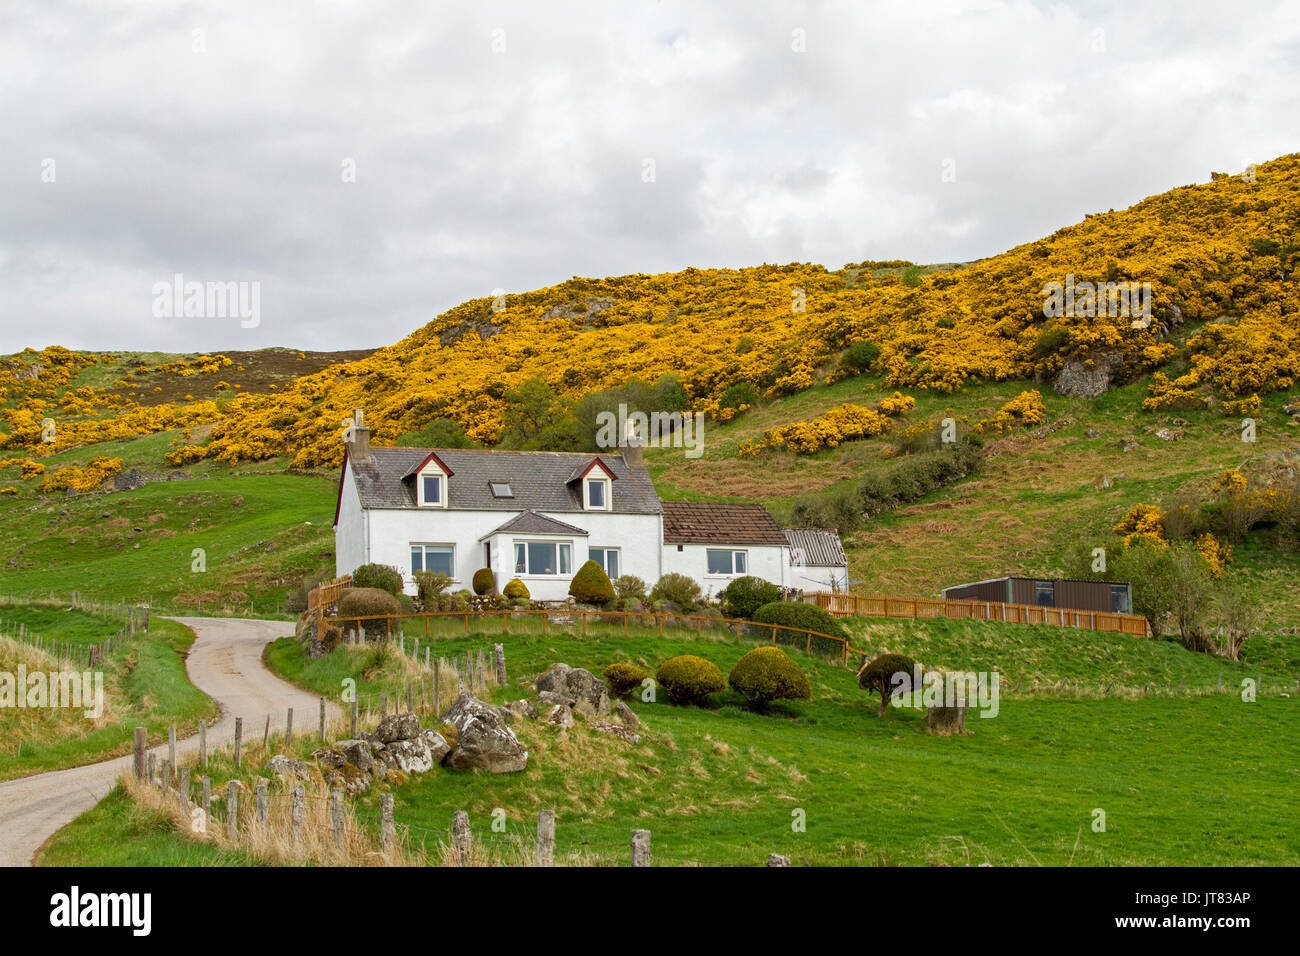 White painted farmhouse / crofter's cottage on hillside with swathes of golden flowered gorse near Lairg, northern Scotland Stock Photo